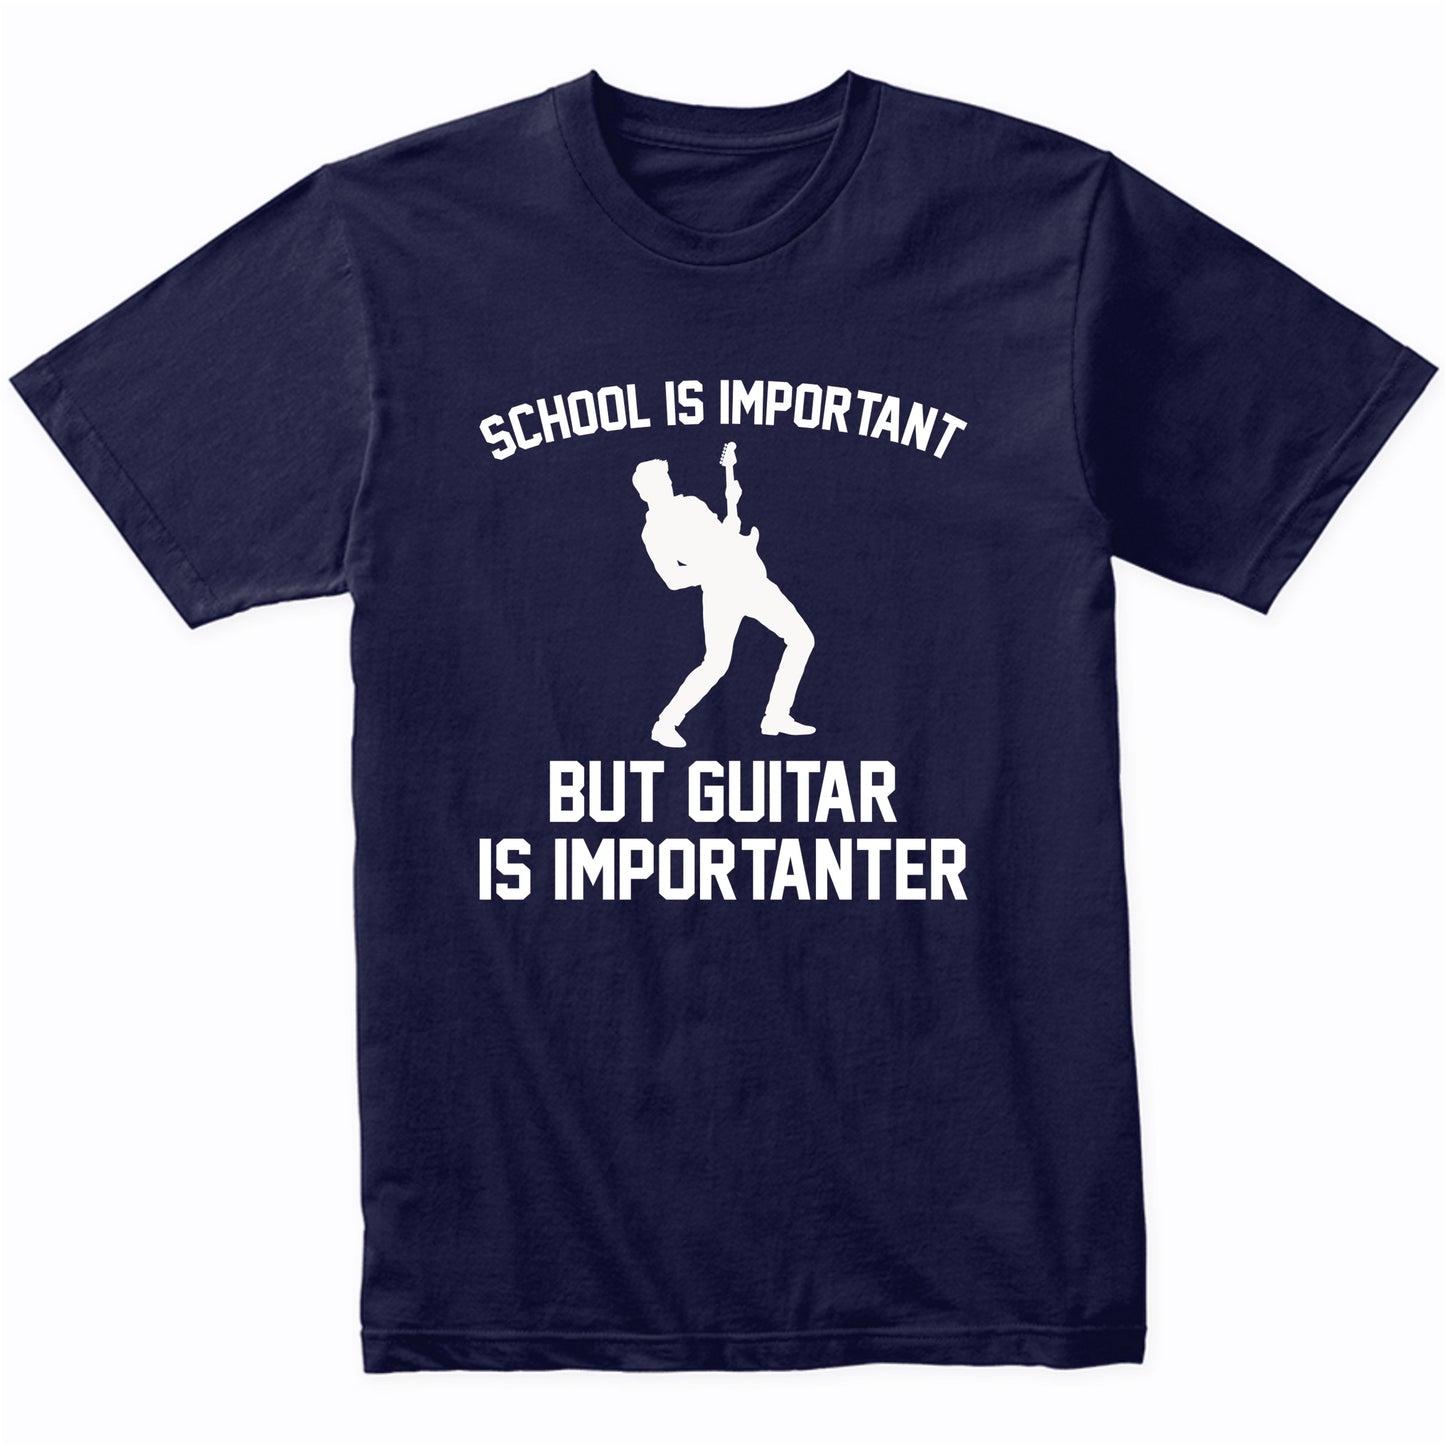 School Is Important But Guitar Is Importanter Funny Shirt